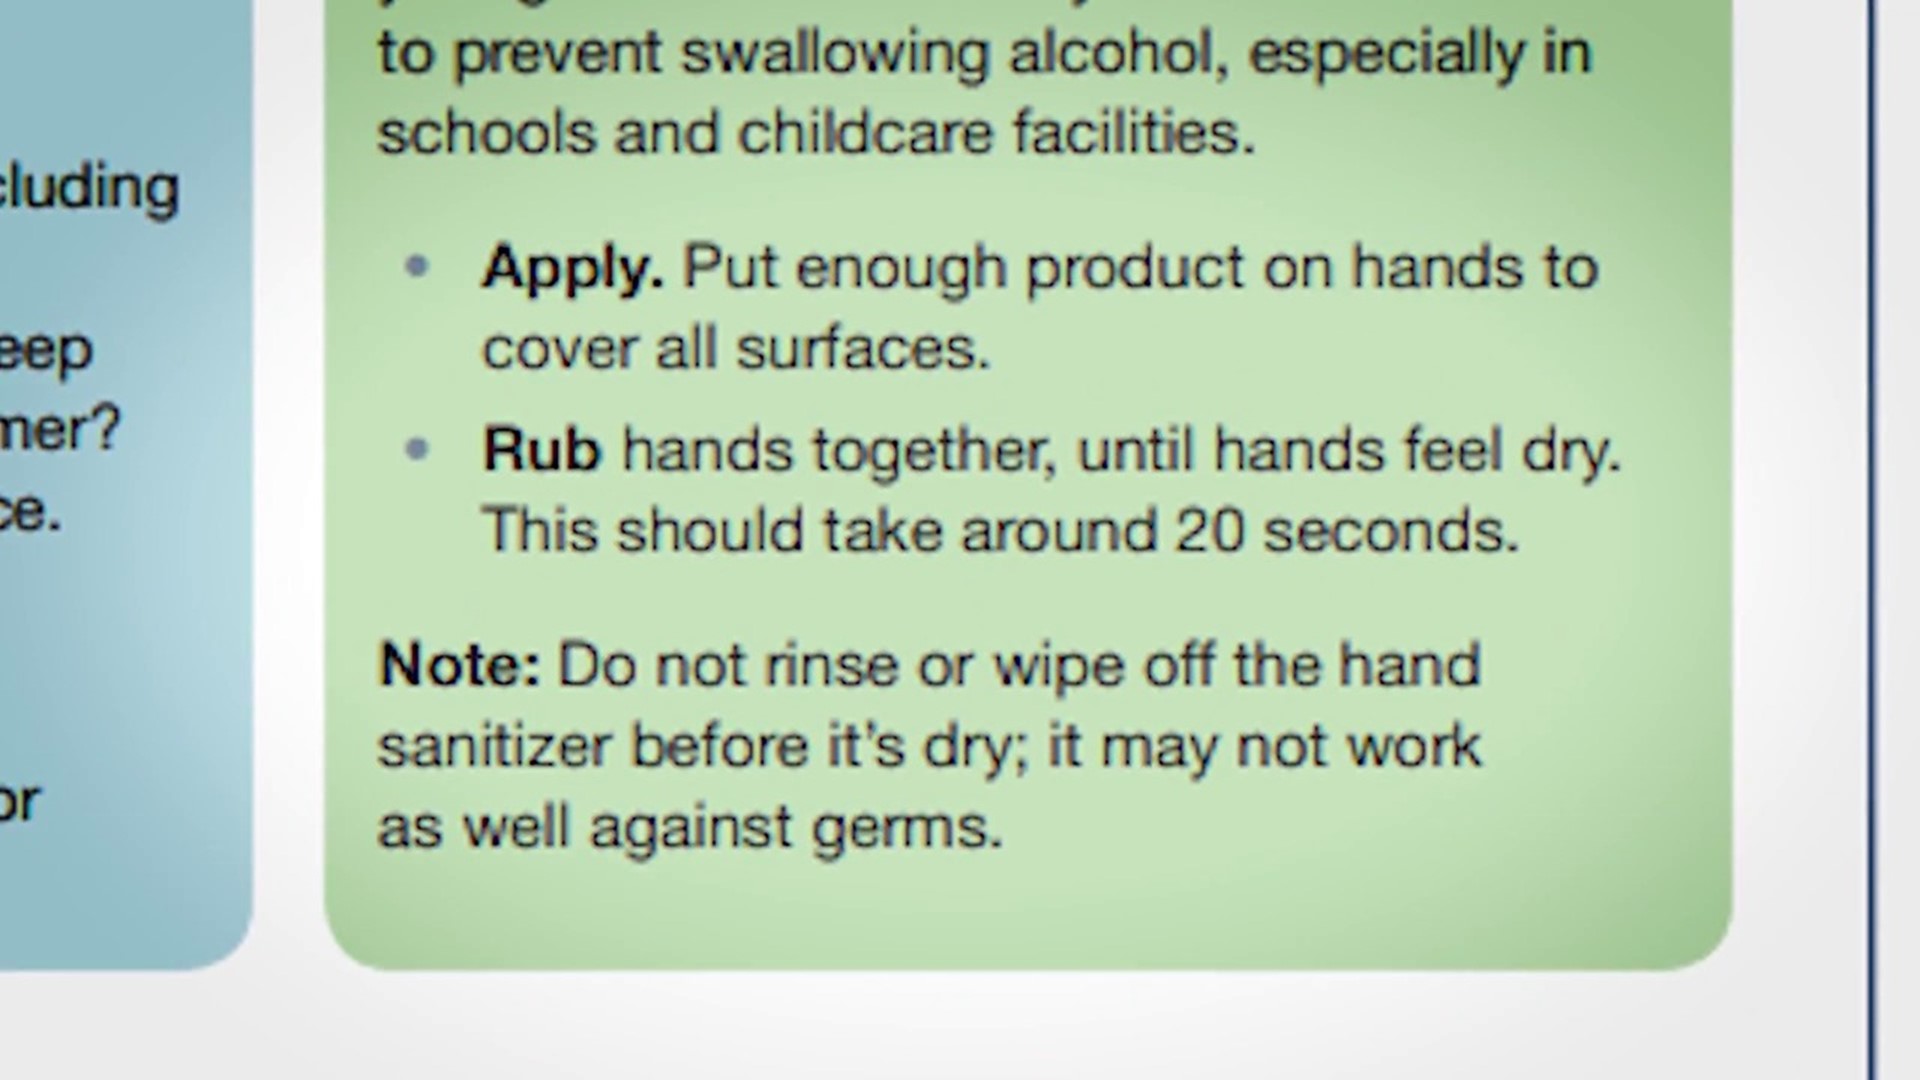 VERIFY: Hand sanitizer for 3-4 minutes